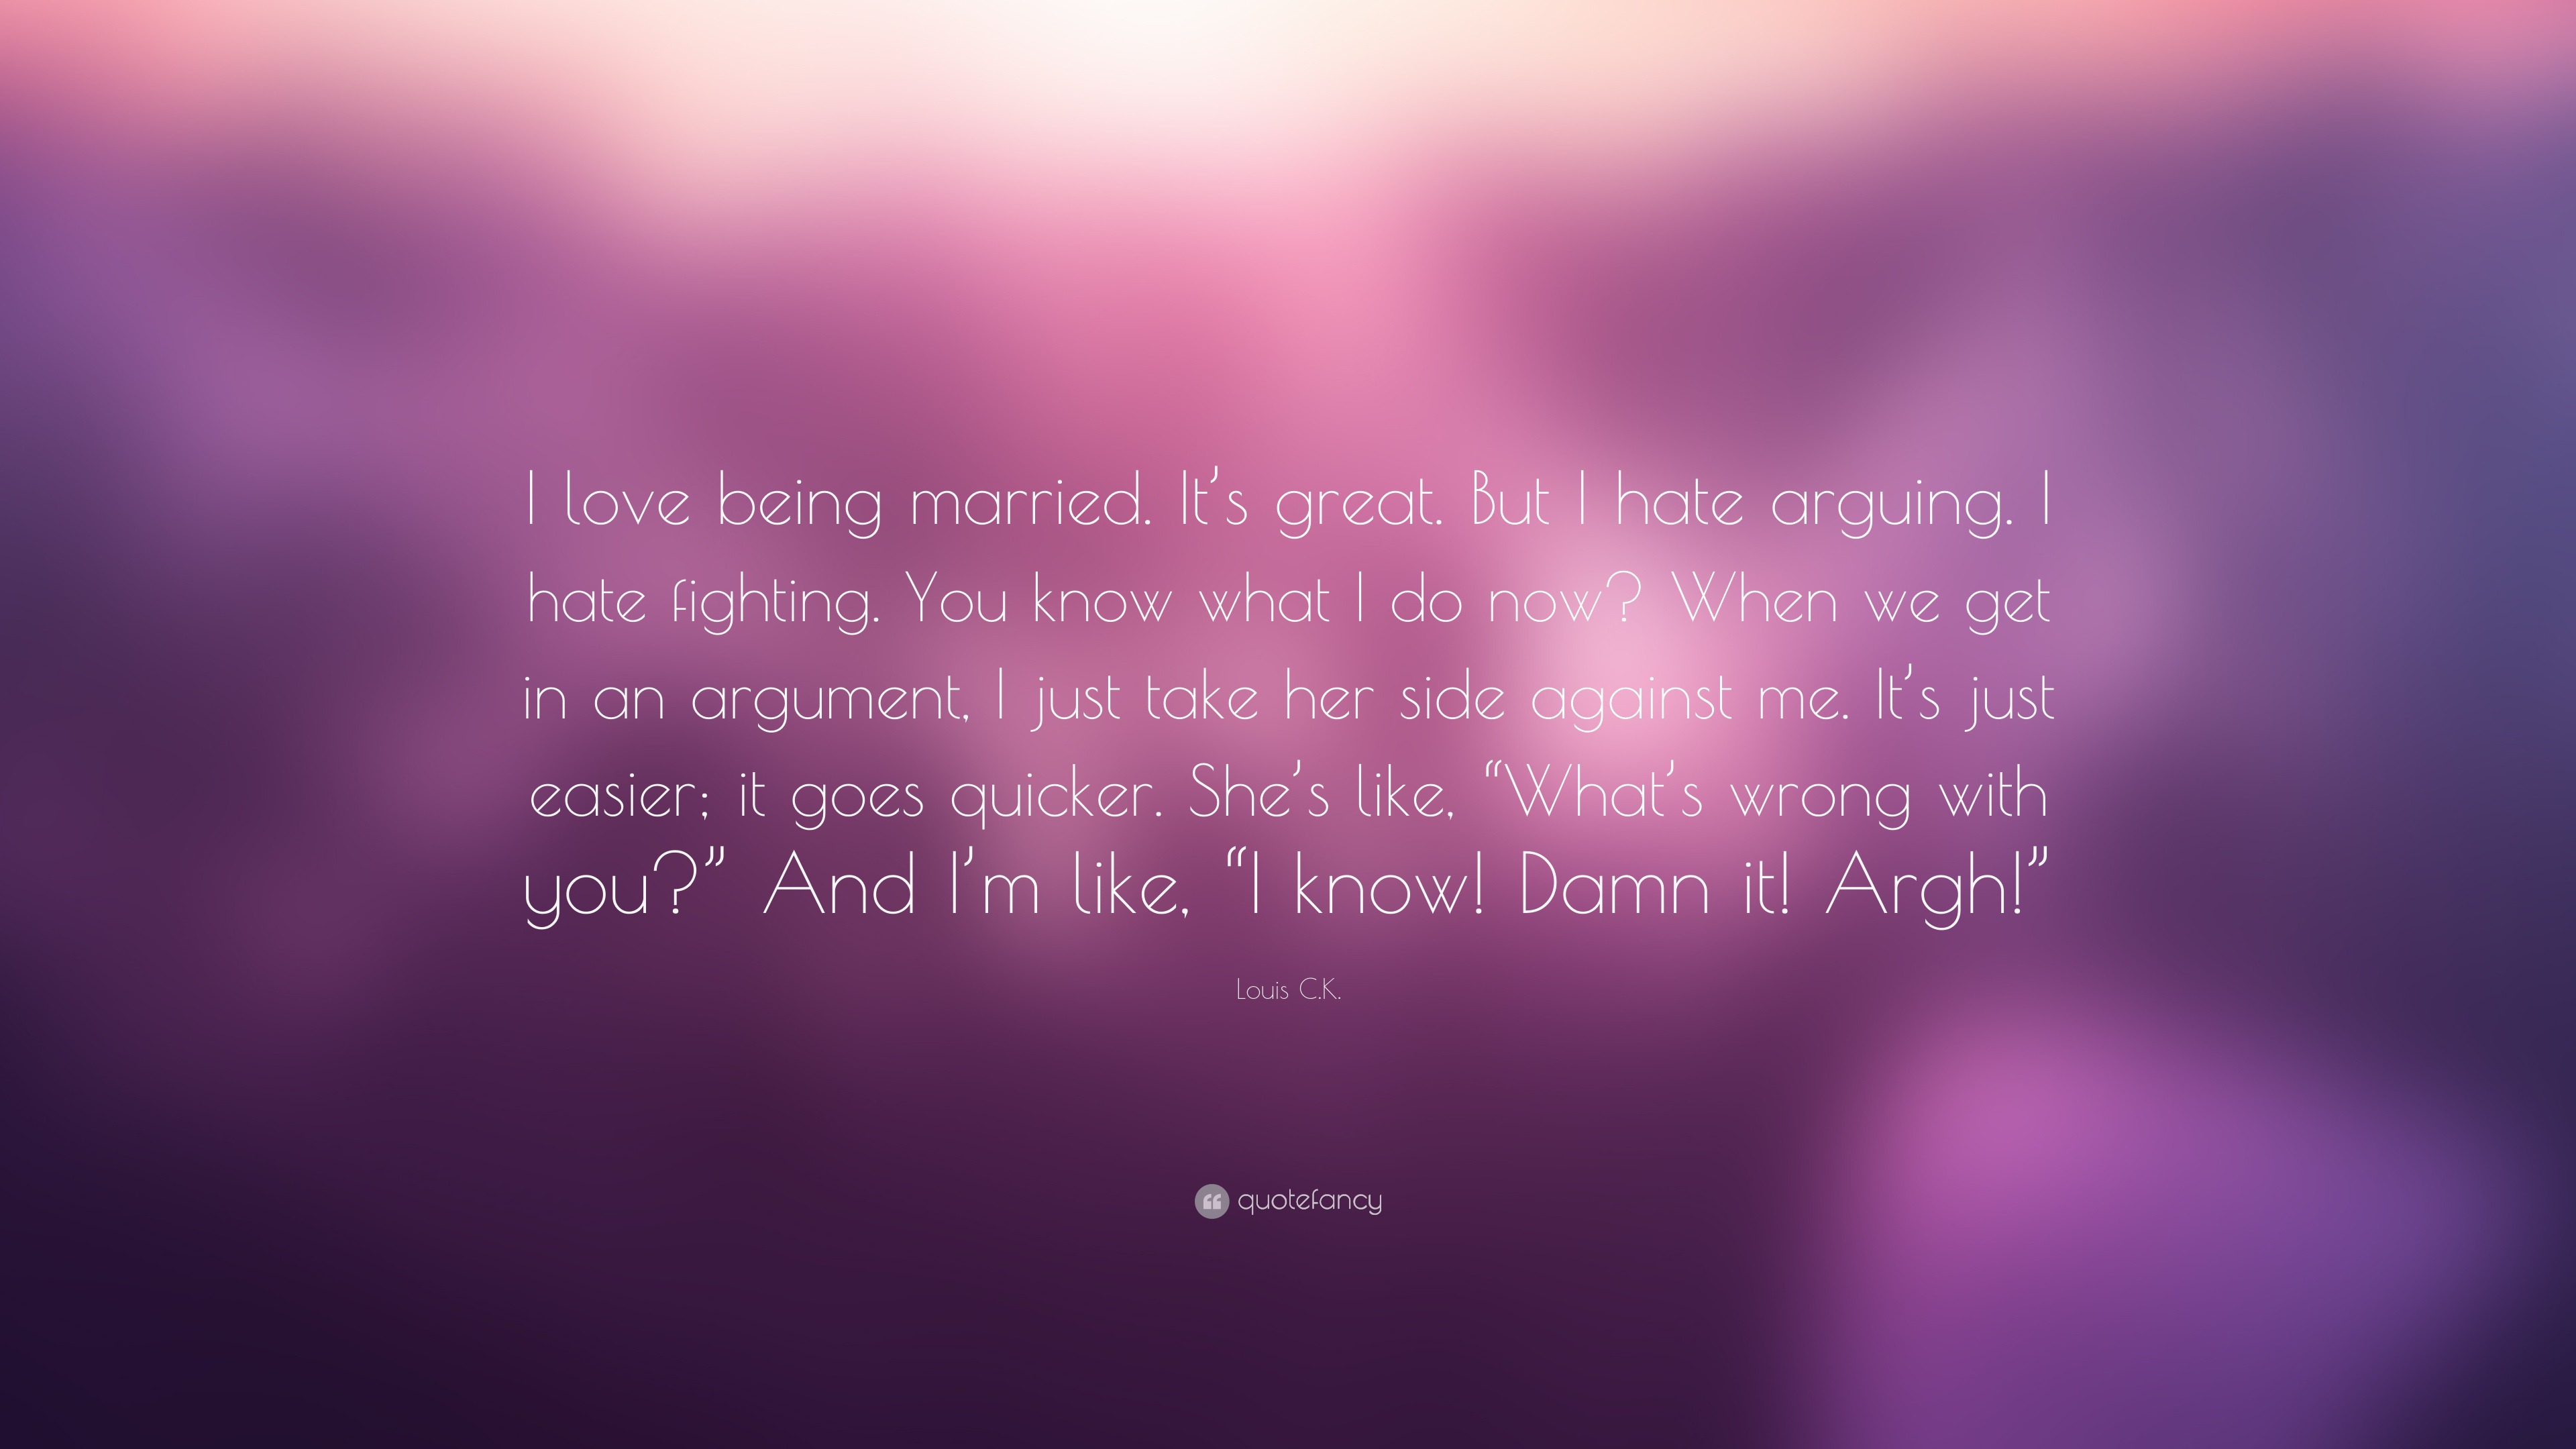 Louis C K Quote “I love being married It s great But I hate